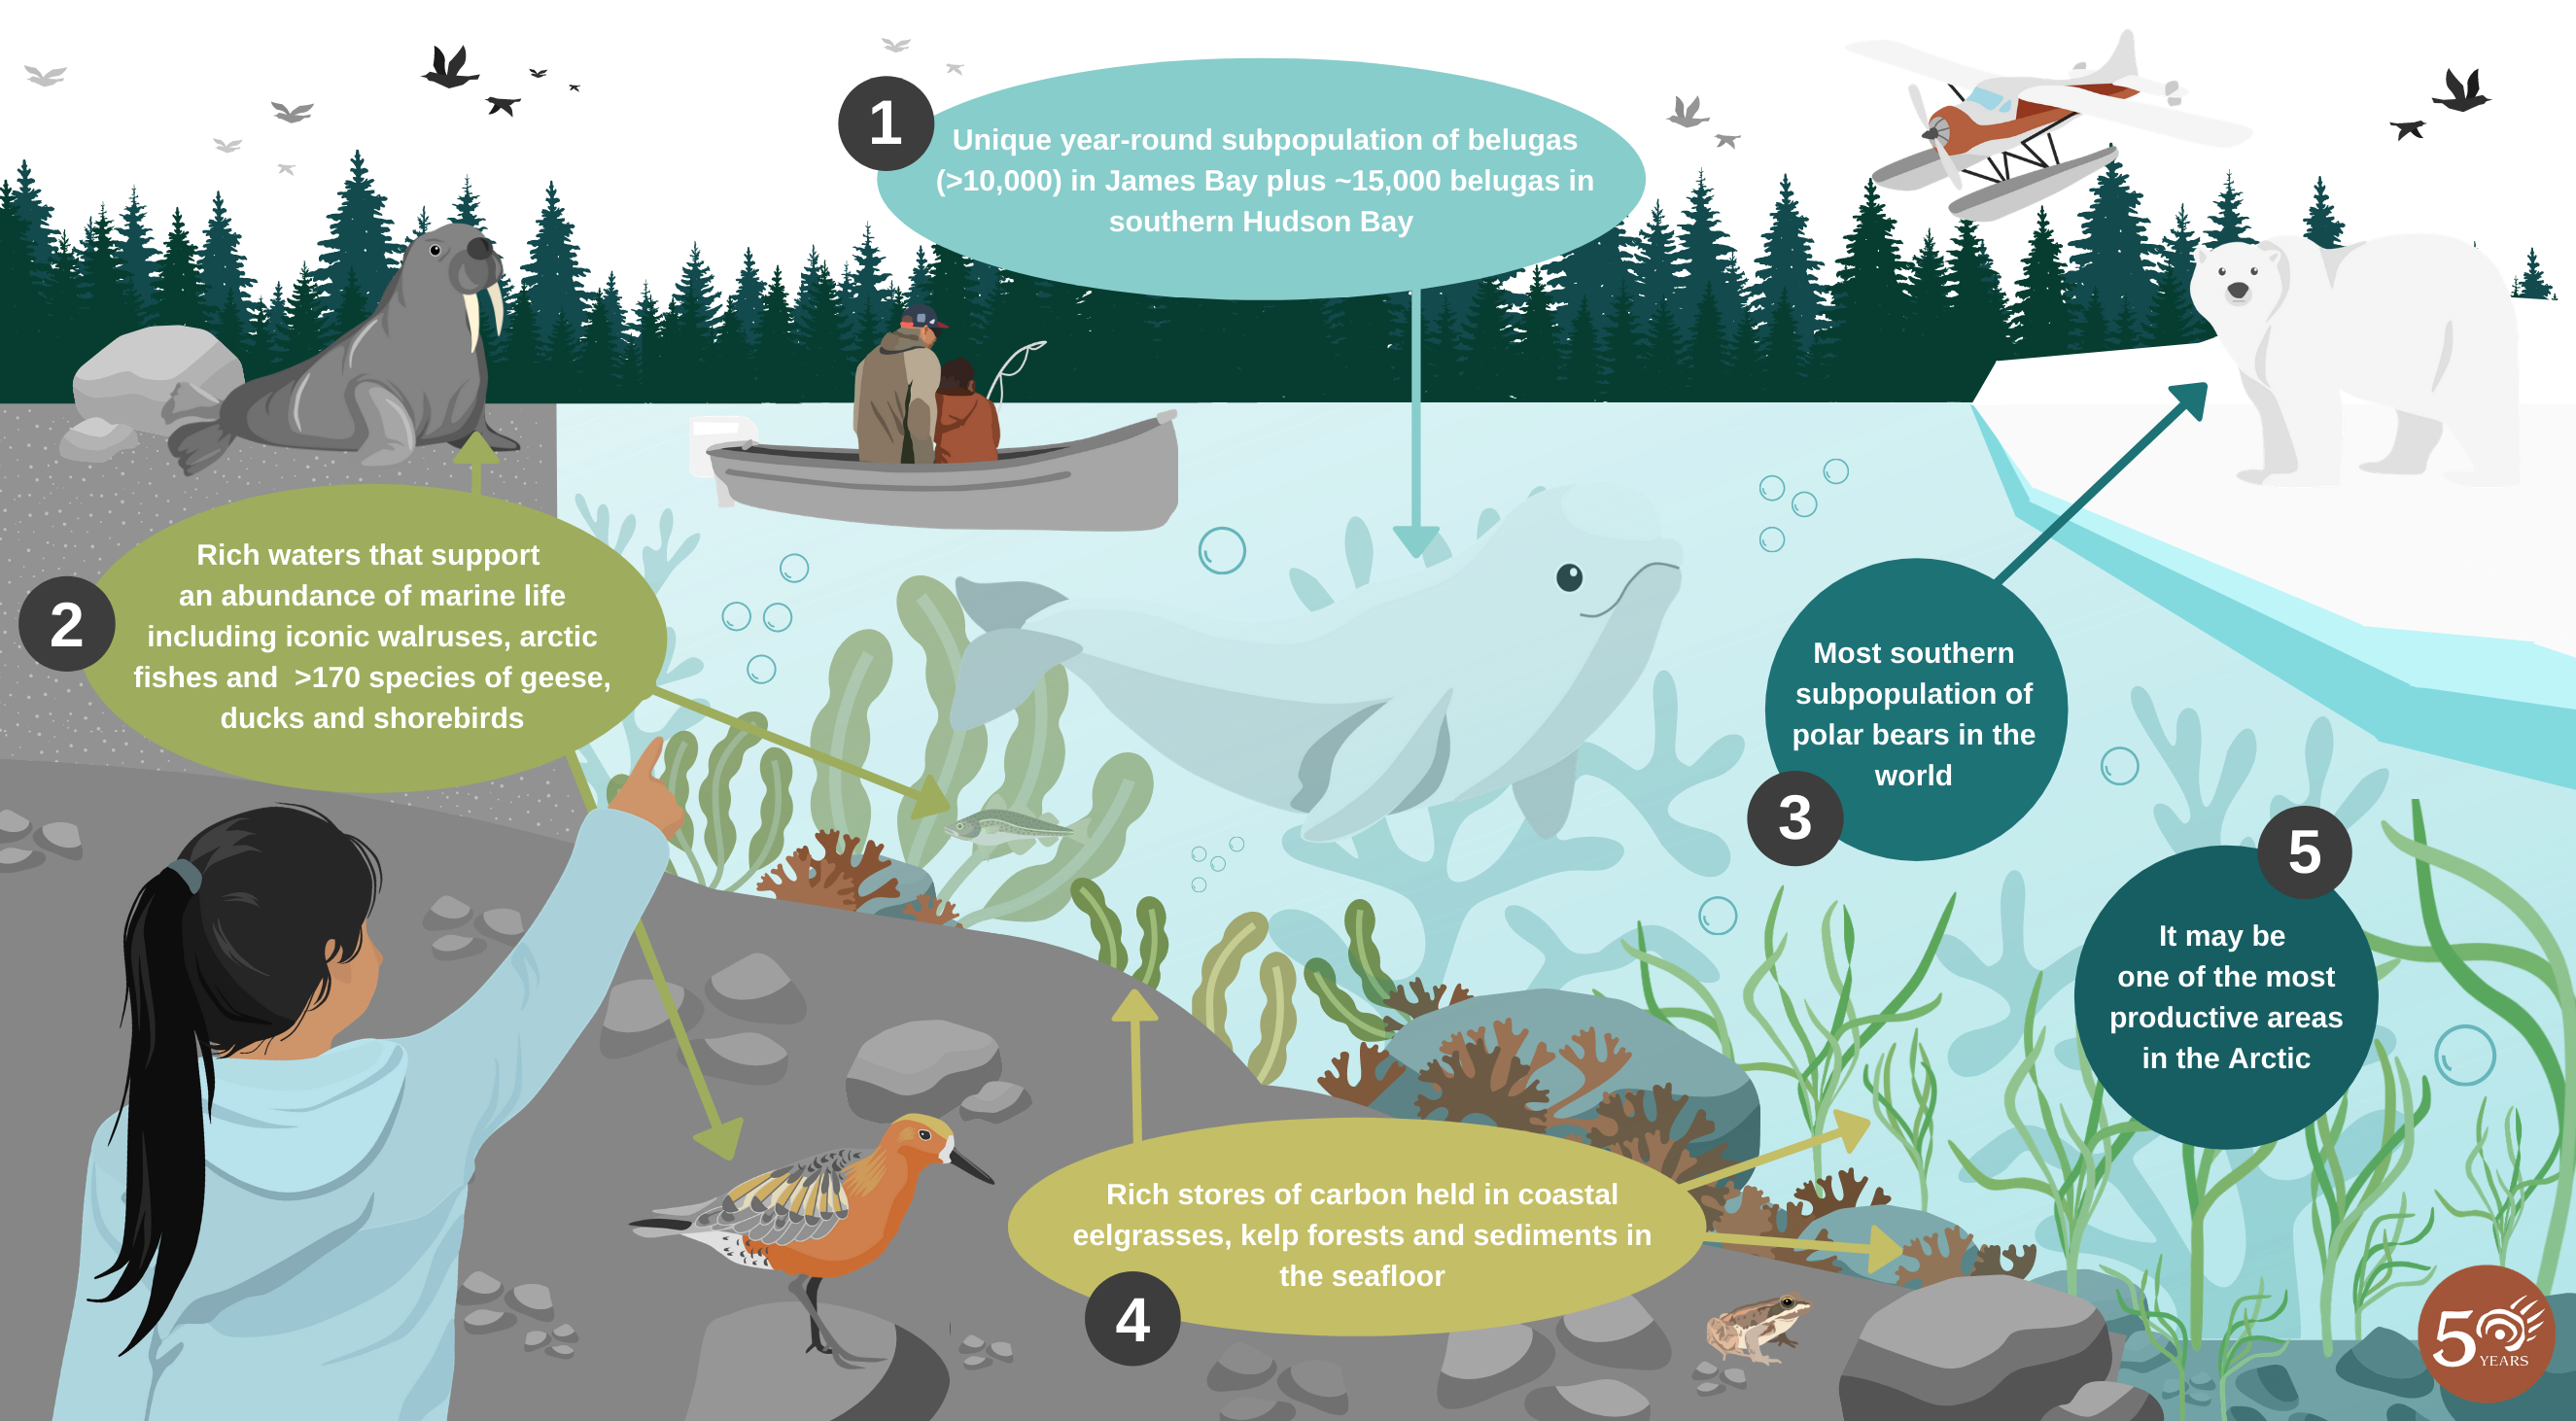 An infographic shows an illustrated coastal marine landscape, with five text bubbles describing features unique to southern Hudson Bay and western James Bay. In the foreground we see a girl pointing to the sky, and nearby a red knot (rufus subspecies) has landed on a rock. Further in the distance we see a cross section of the water, with a beluga and various seaweed and seagrass. There is a boat with an adult and child fishing on the water, elsewhere there is an ice floe with a polar bear. In the distance, is a walrus on shore, a boreal tree line and a float plane in the sky. Bubble 1: Unique year-round subpopulation of belugas (greater than 10,000) in James Bay plus roughly 15,000 belugas in southern Hudson Bay. Bubble 2: Rich waters that support an abundance of marine life including iconic walruses, arctic fishes and more than 170 species of geese, ducks and shorebirds. Bubble 3: Most southern subpopulation of polar bears in the world. Bubble 4: Rich stores of carbon held in coastal eel grasses, kelp forests and sediments in the seafloor. Bubble 5: It may be one of the most productive areas in the arctic.